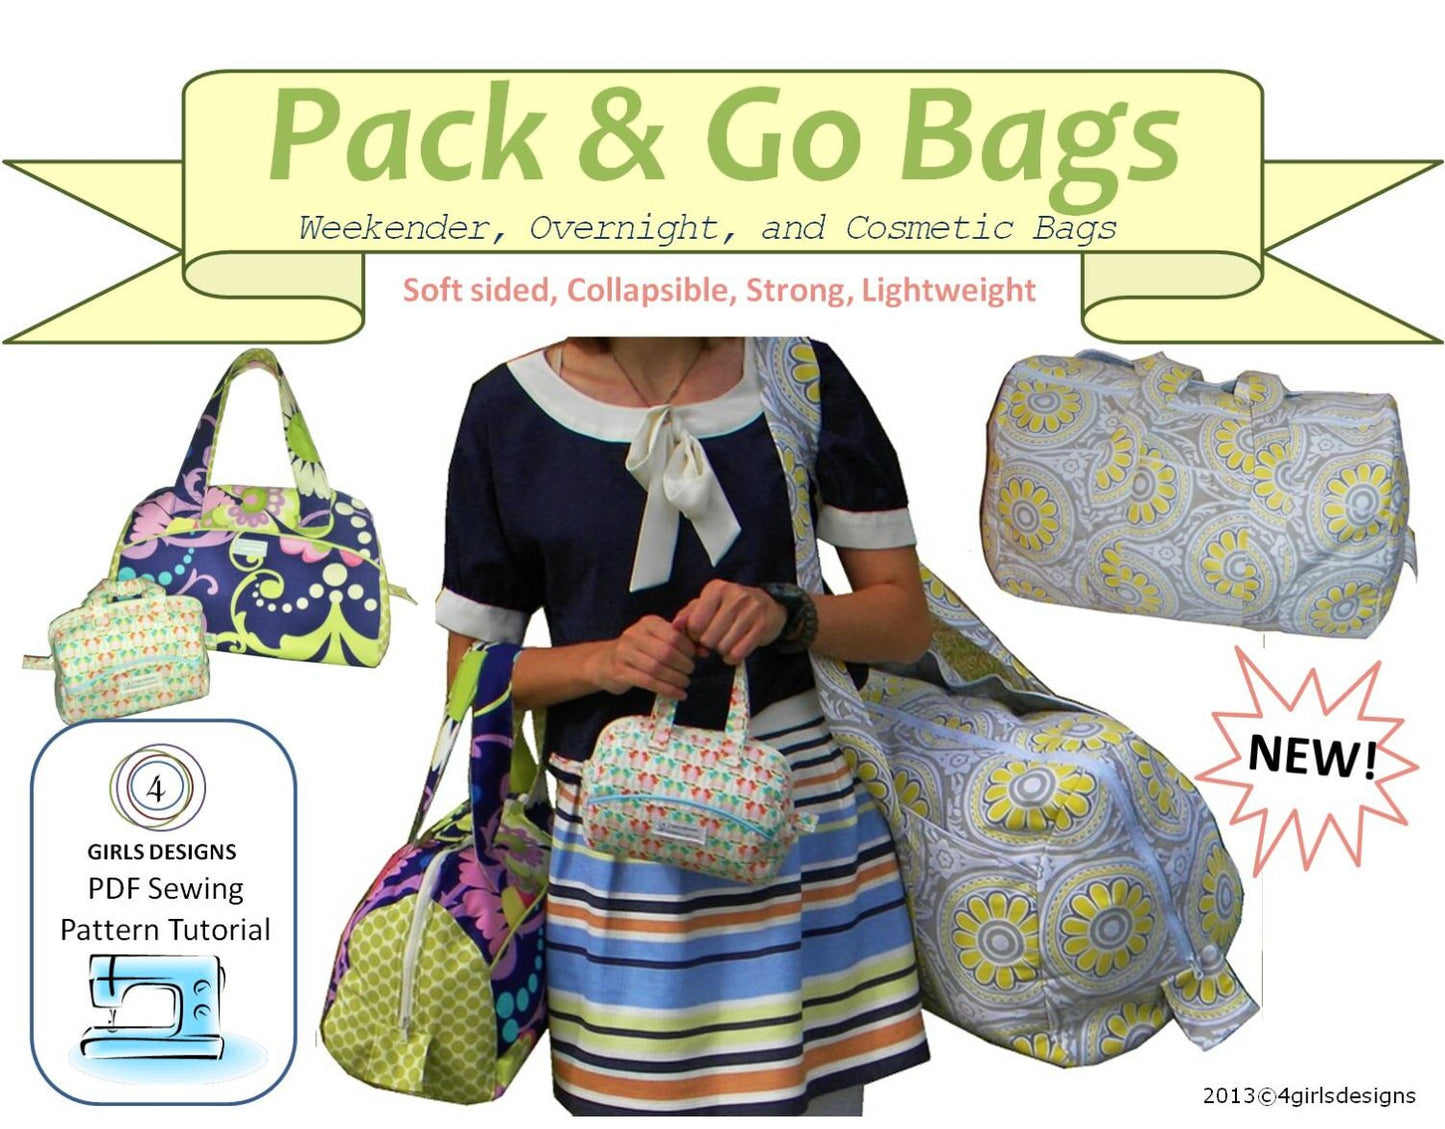 Duffel Bag Sewing Pattern PDF.Instant Download New Pack and Go Bags. Soft Sided, Collapsible, Strong and Lightweight Bags in Three Sizes